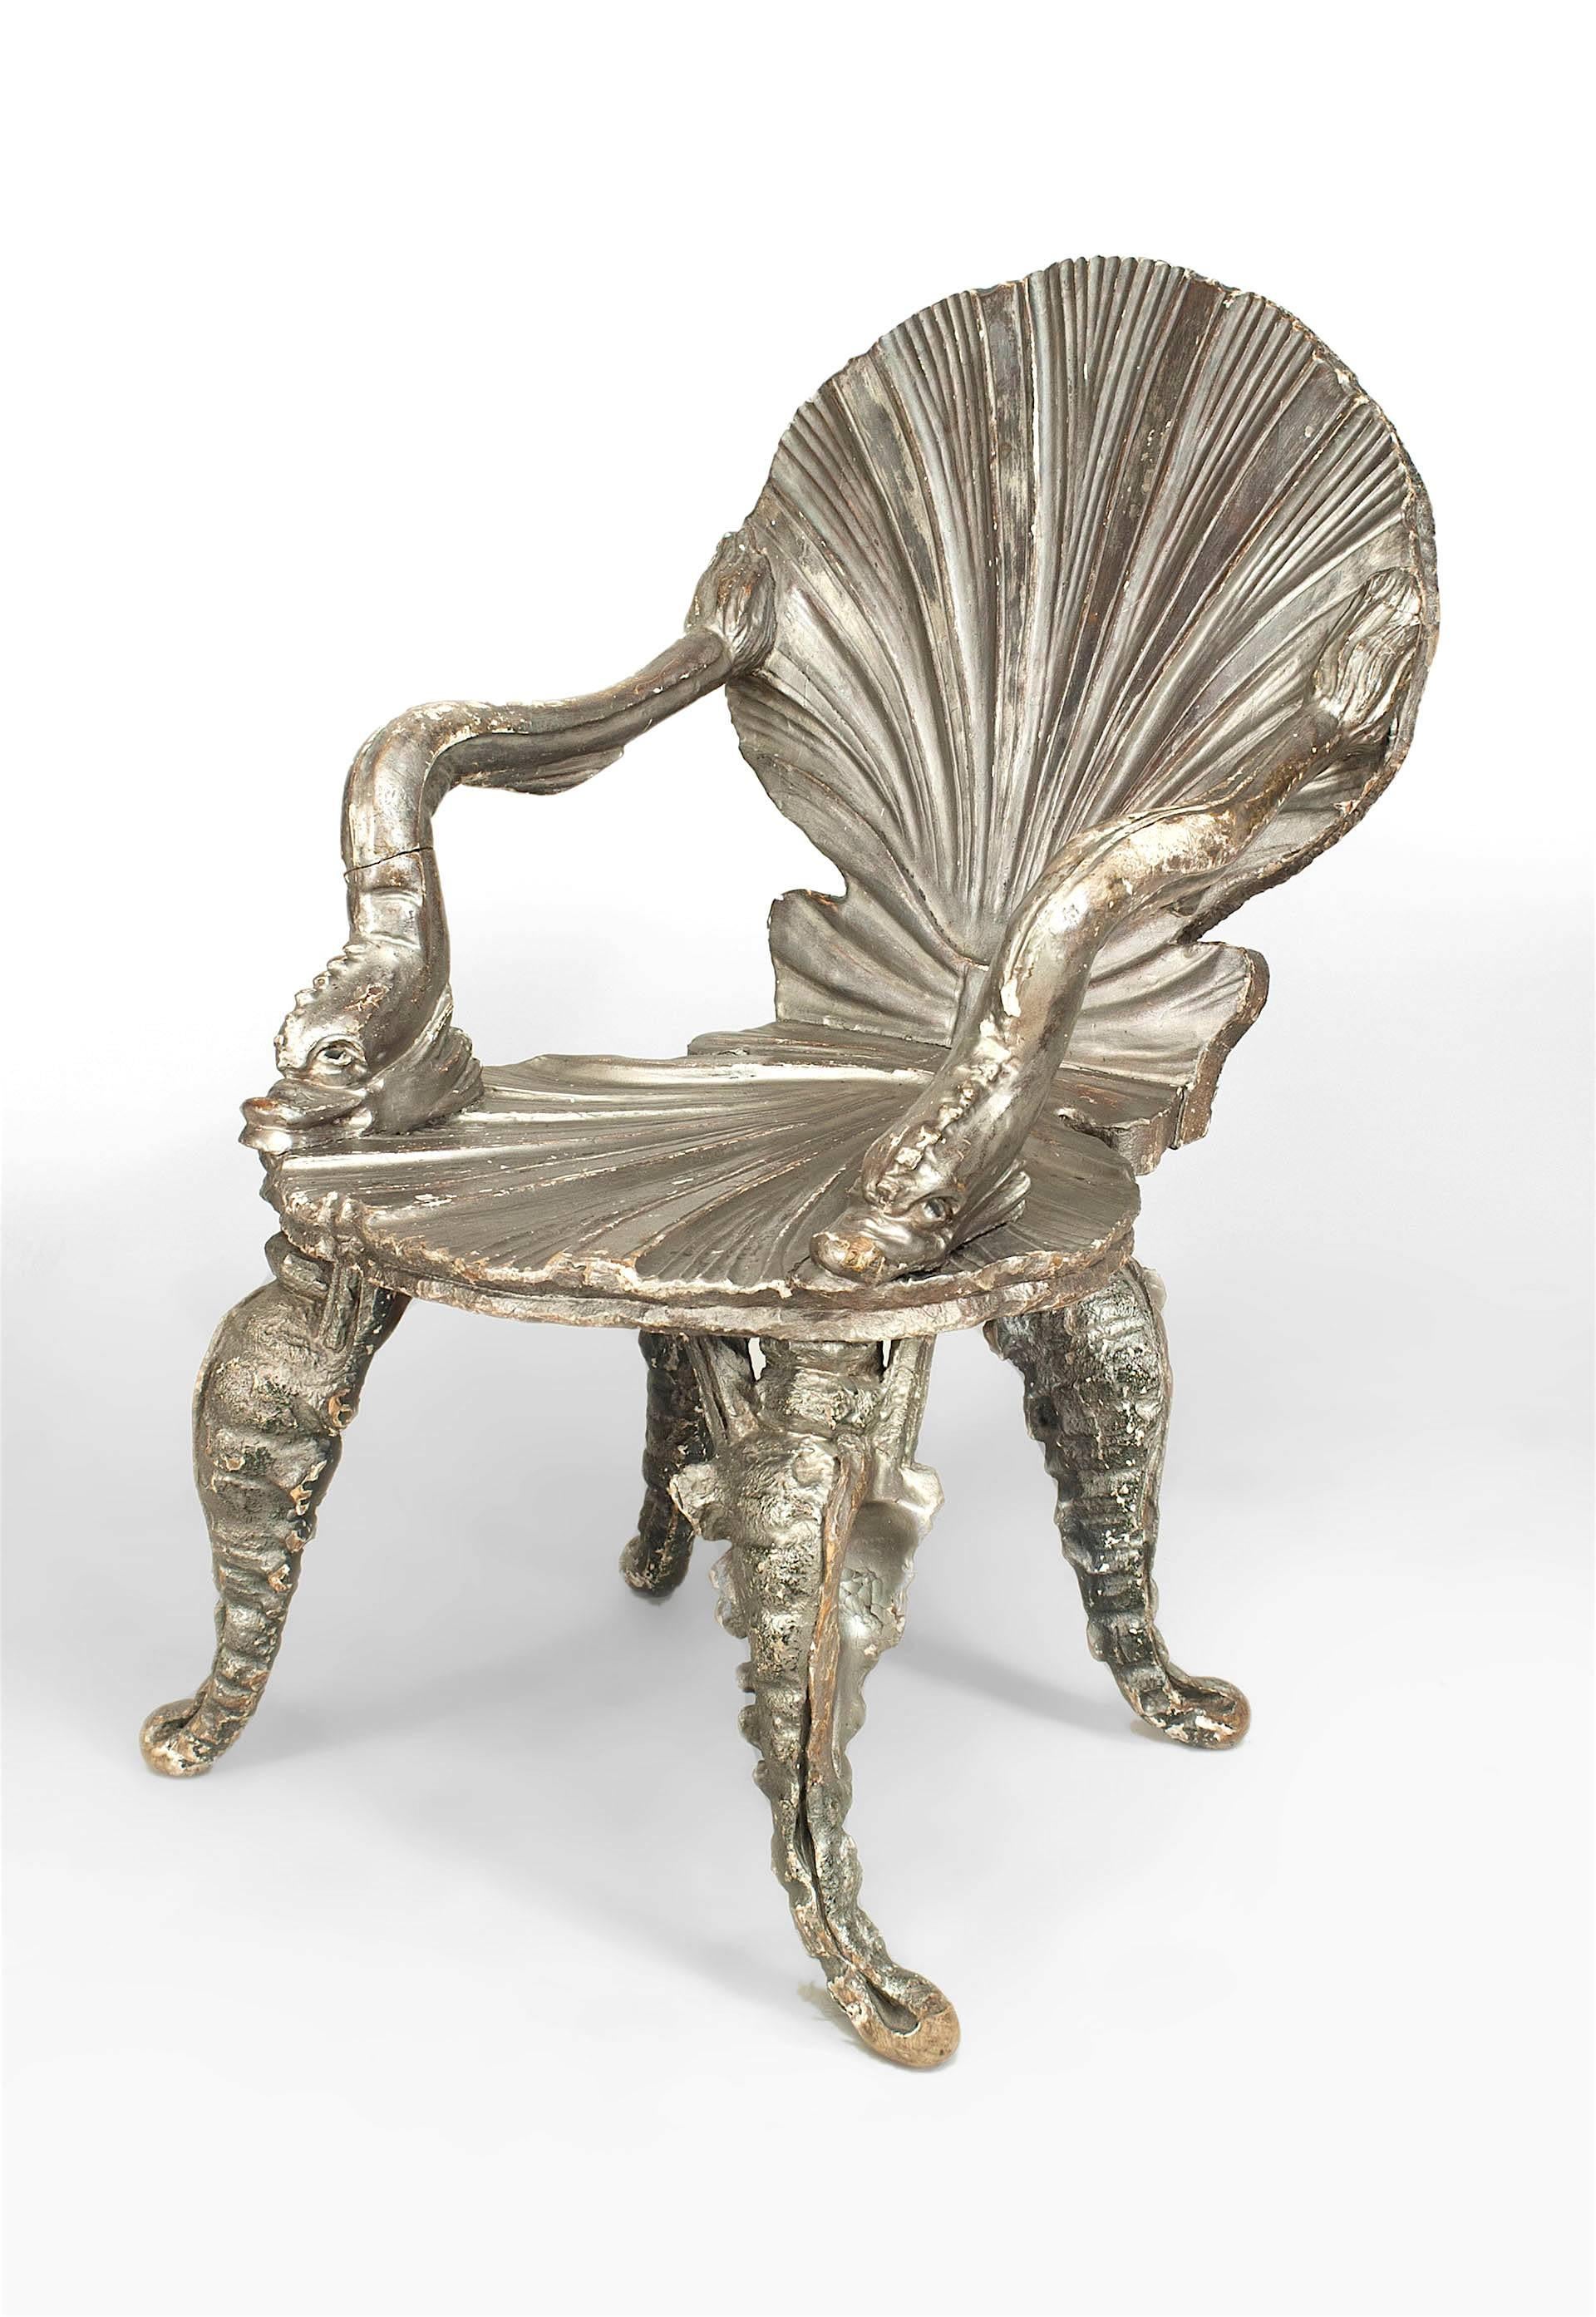 Late nineteenth century Venetian grotto style silver gilt armchair with a carved shell form seat and back with dolphin arms and four curved, marine-inspired legs.